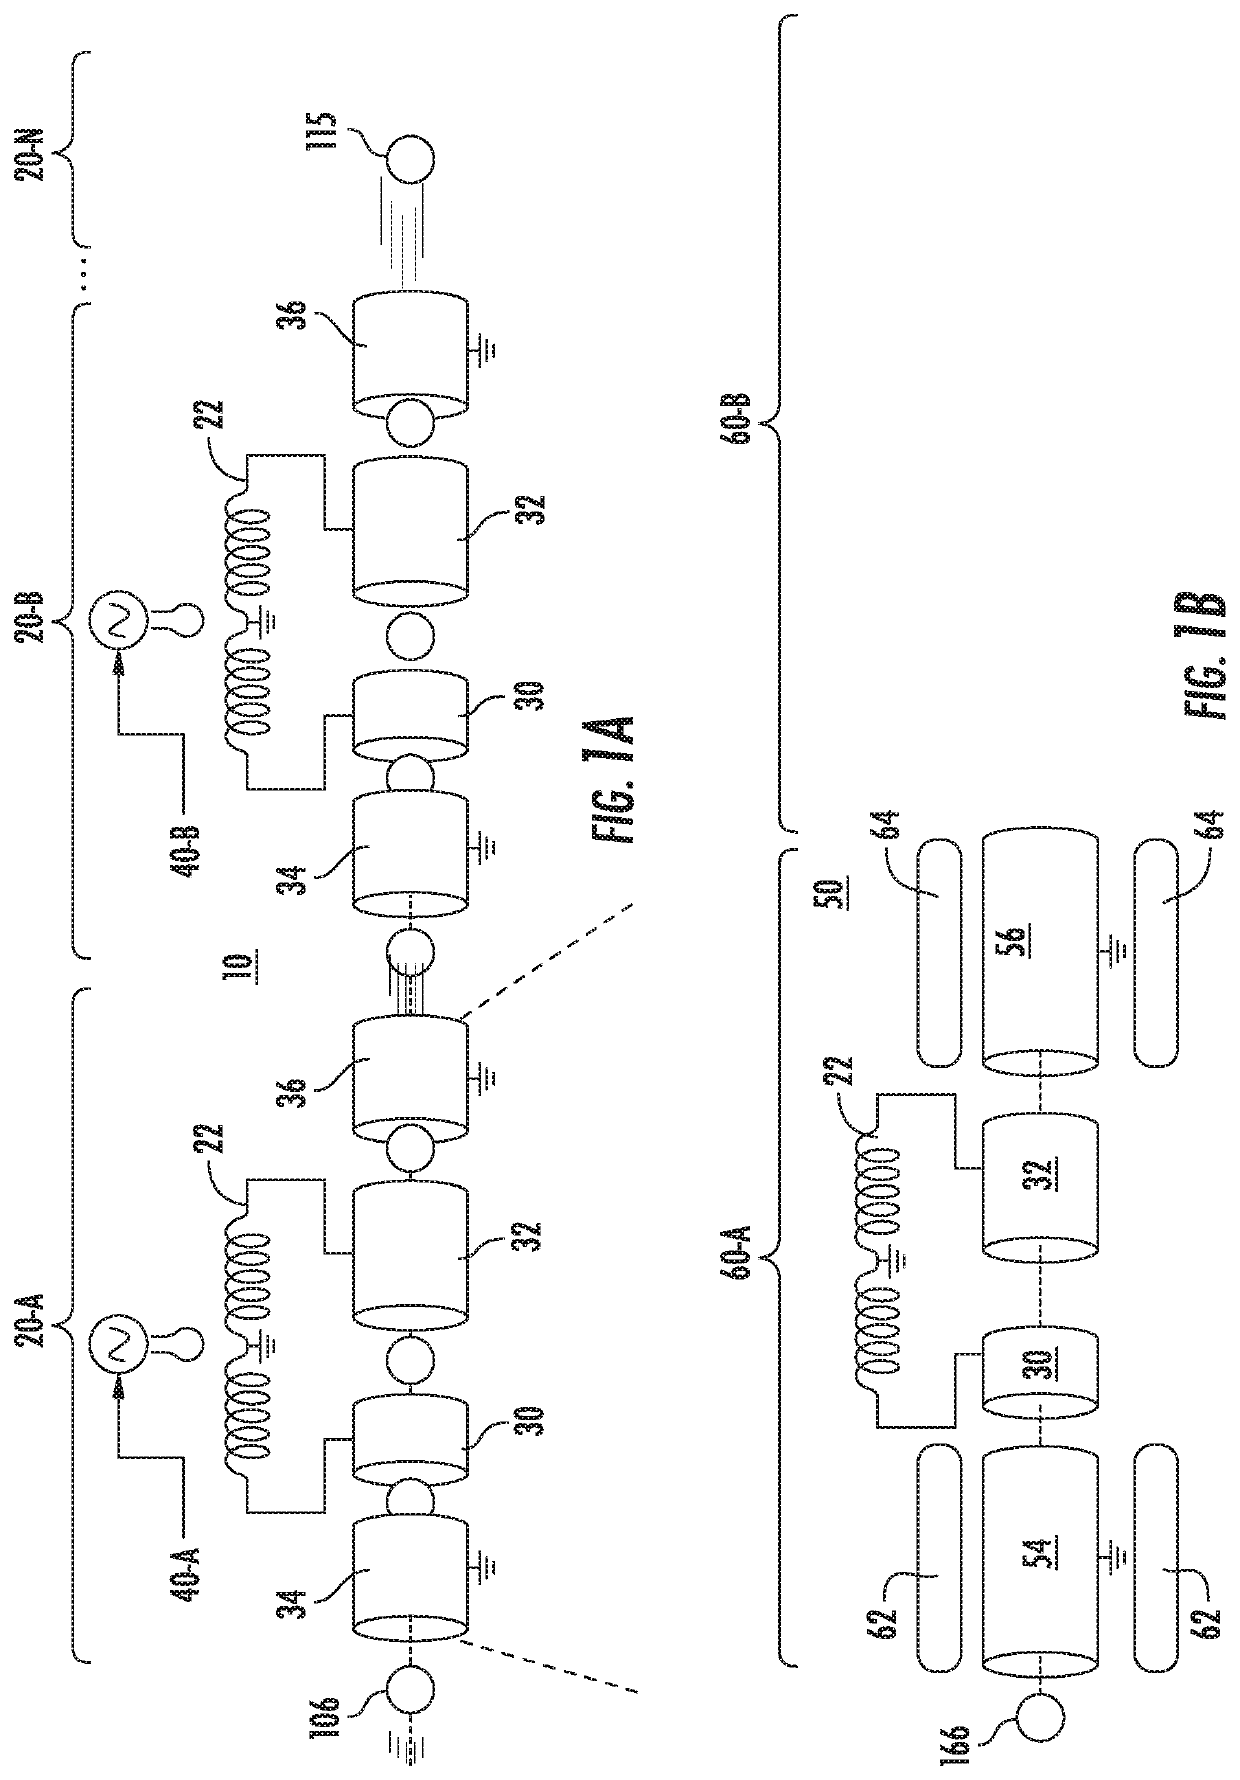 Ion implantation system and linear accelerator having novel accelerator stage configuration